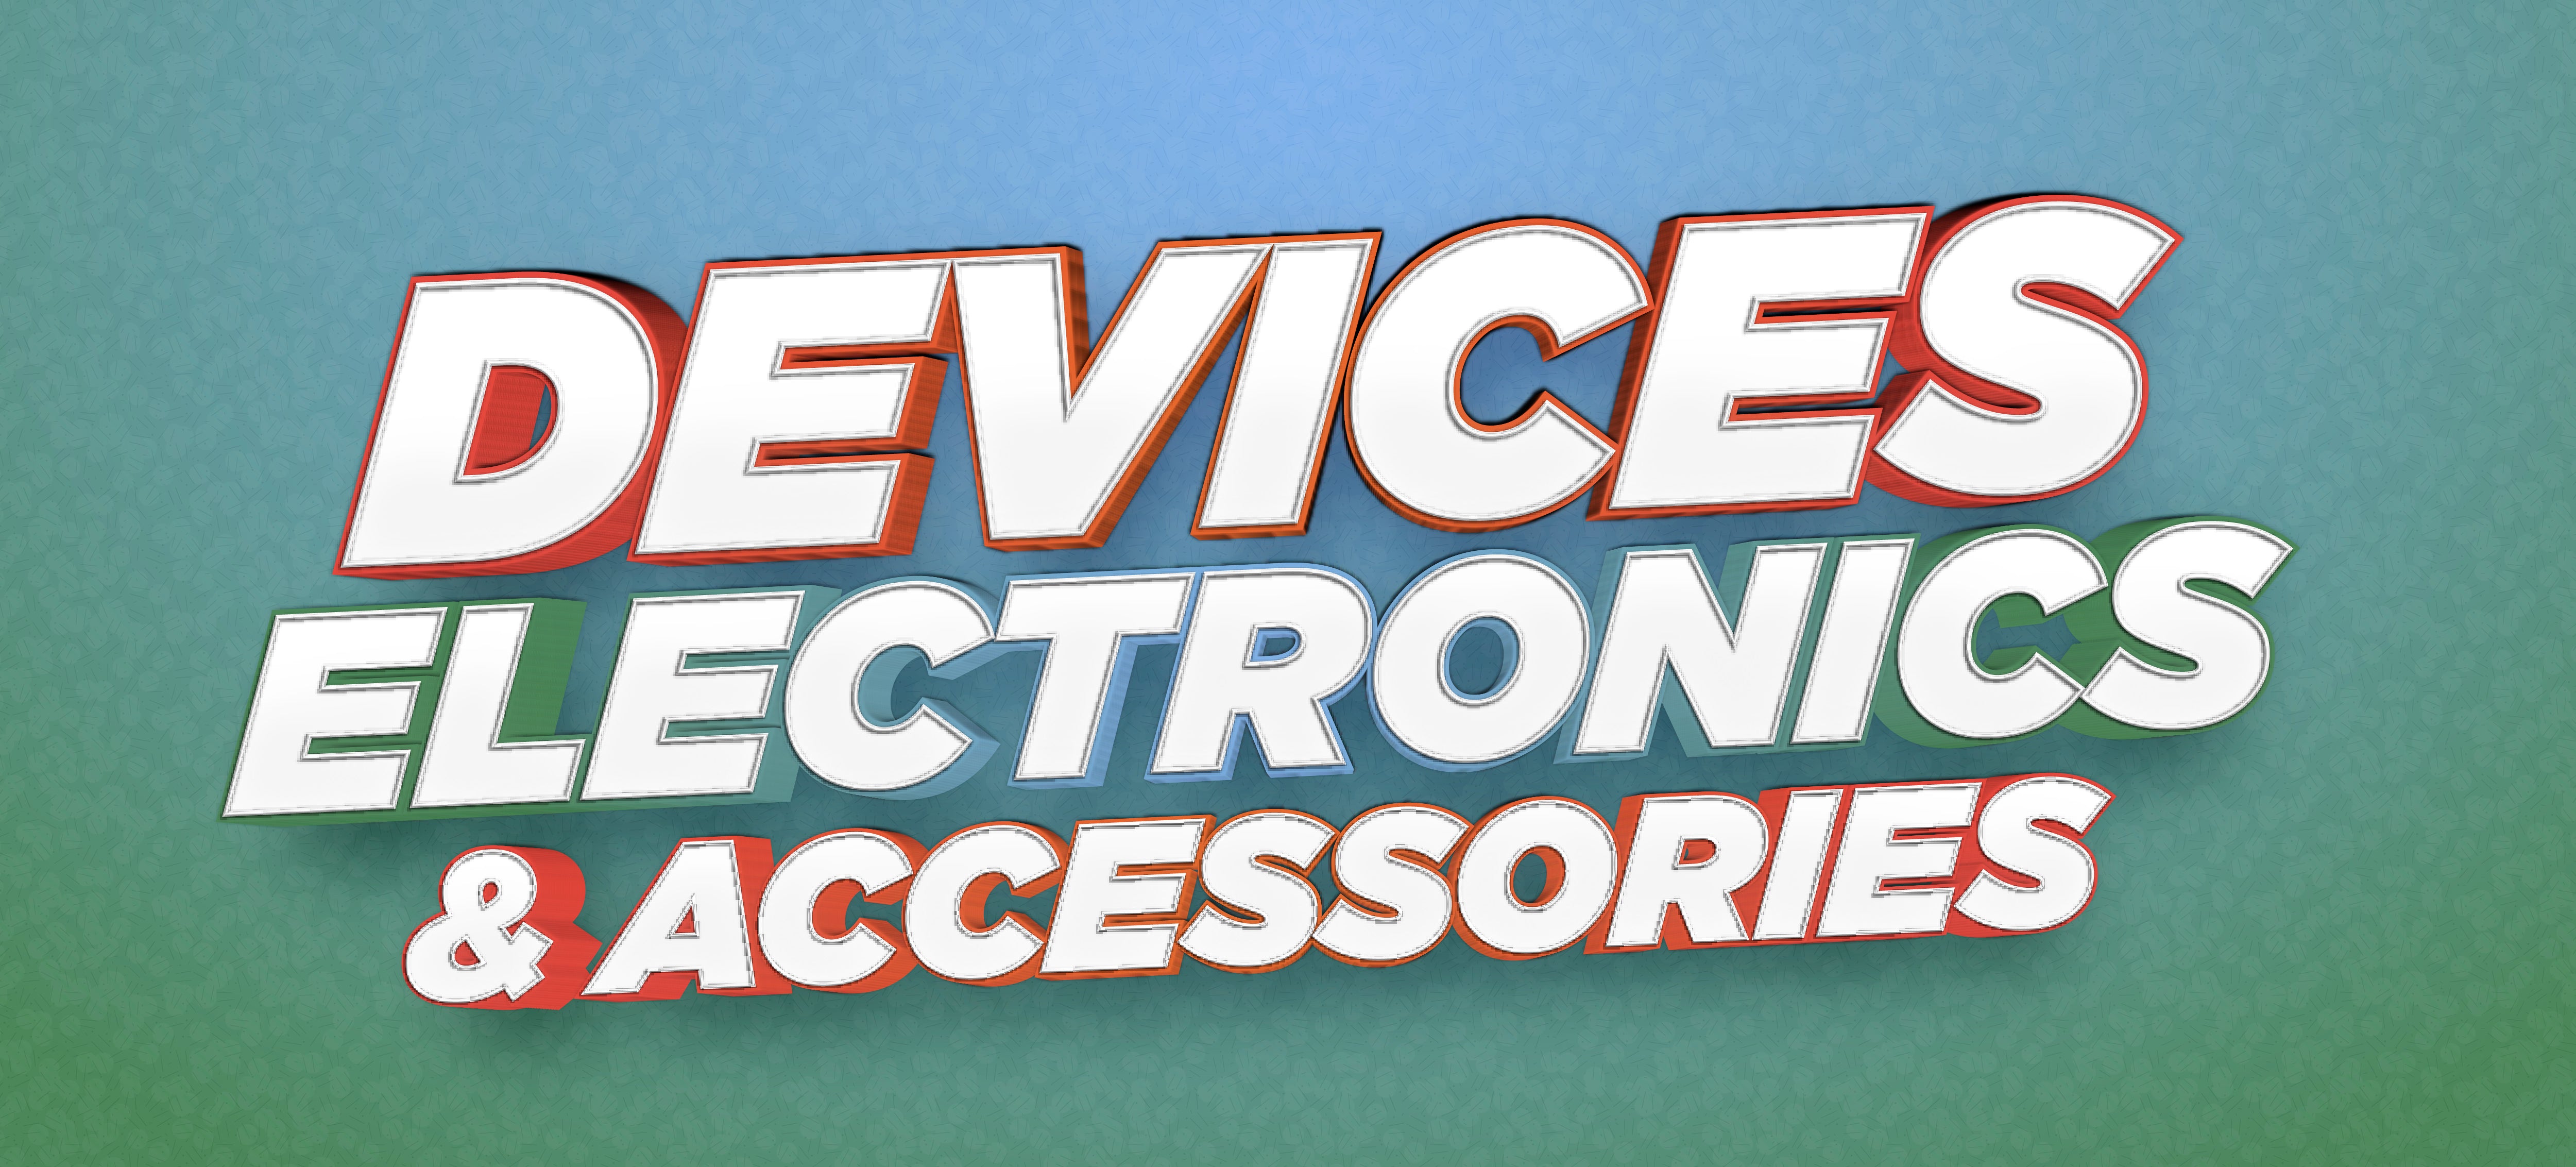 Devices, Electronics & Accessories